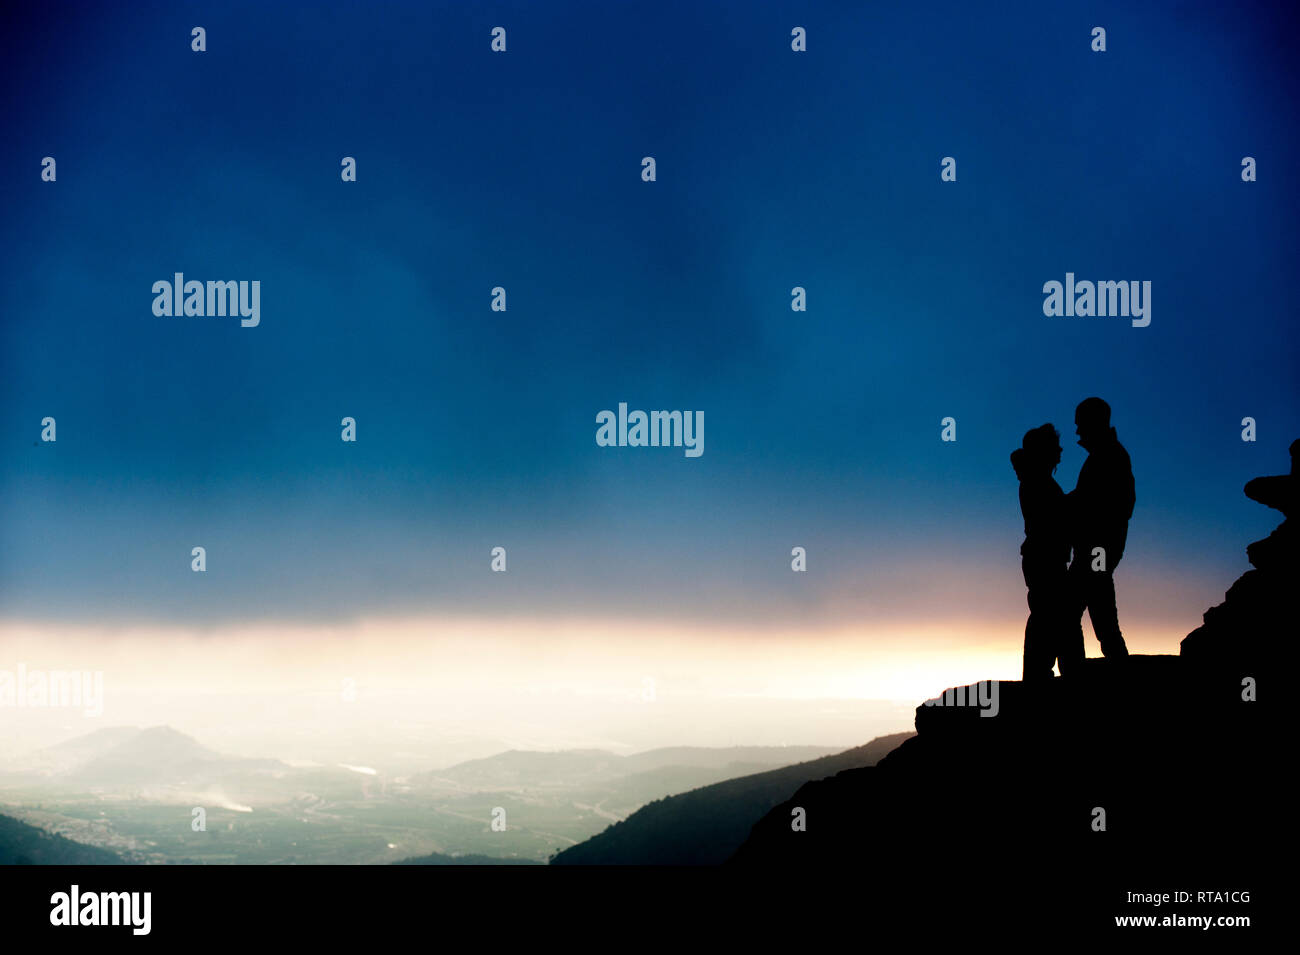 silhouette of couple of man and woman on a mountain with storm background Stock Photo